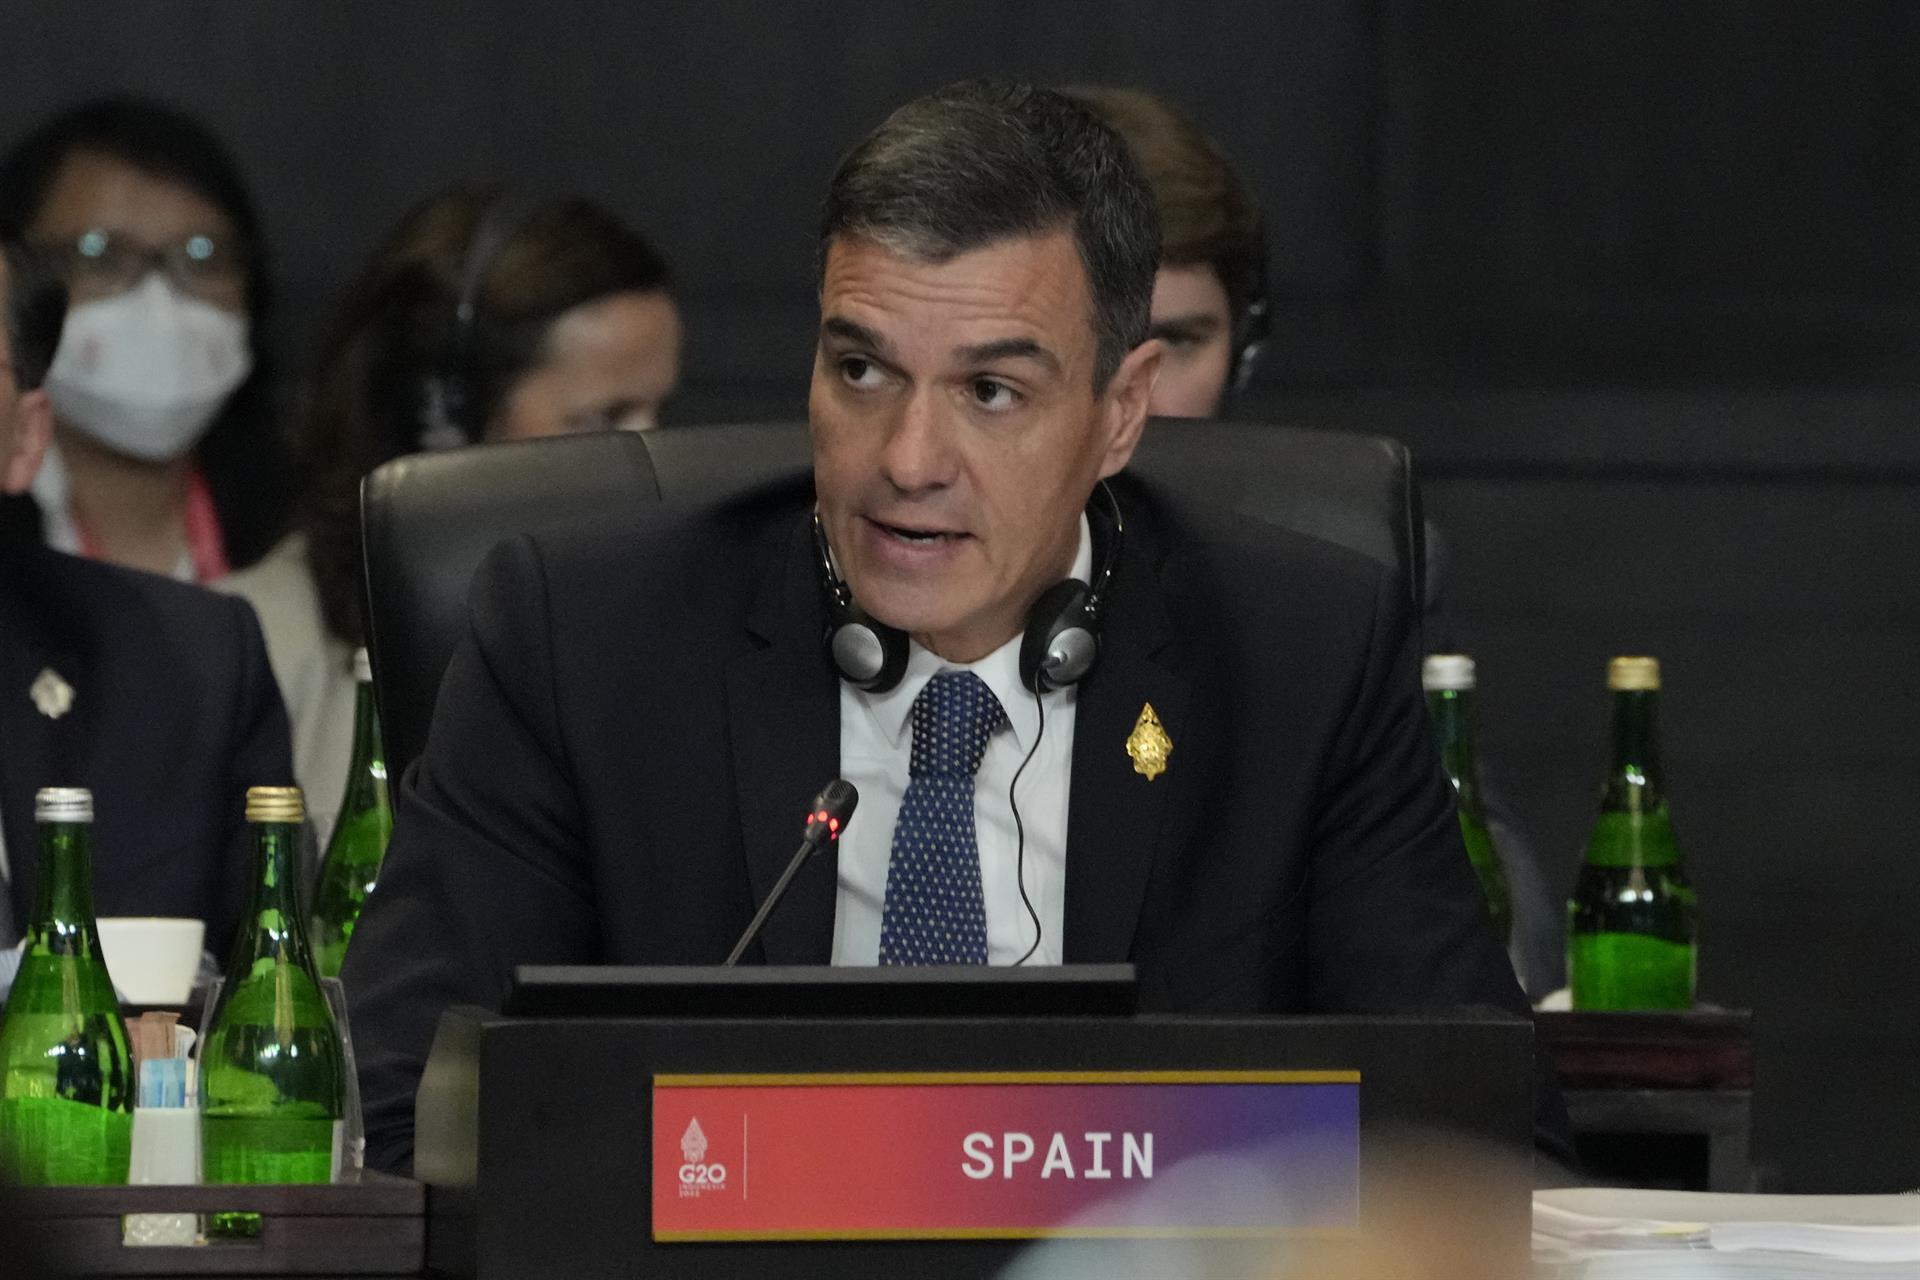 Spanish PM at G-20: Catalonia's 2017 independence declaration was a "big problem"